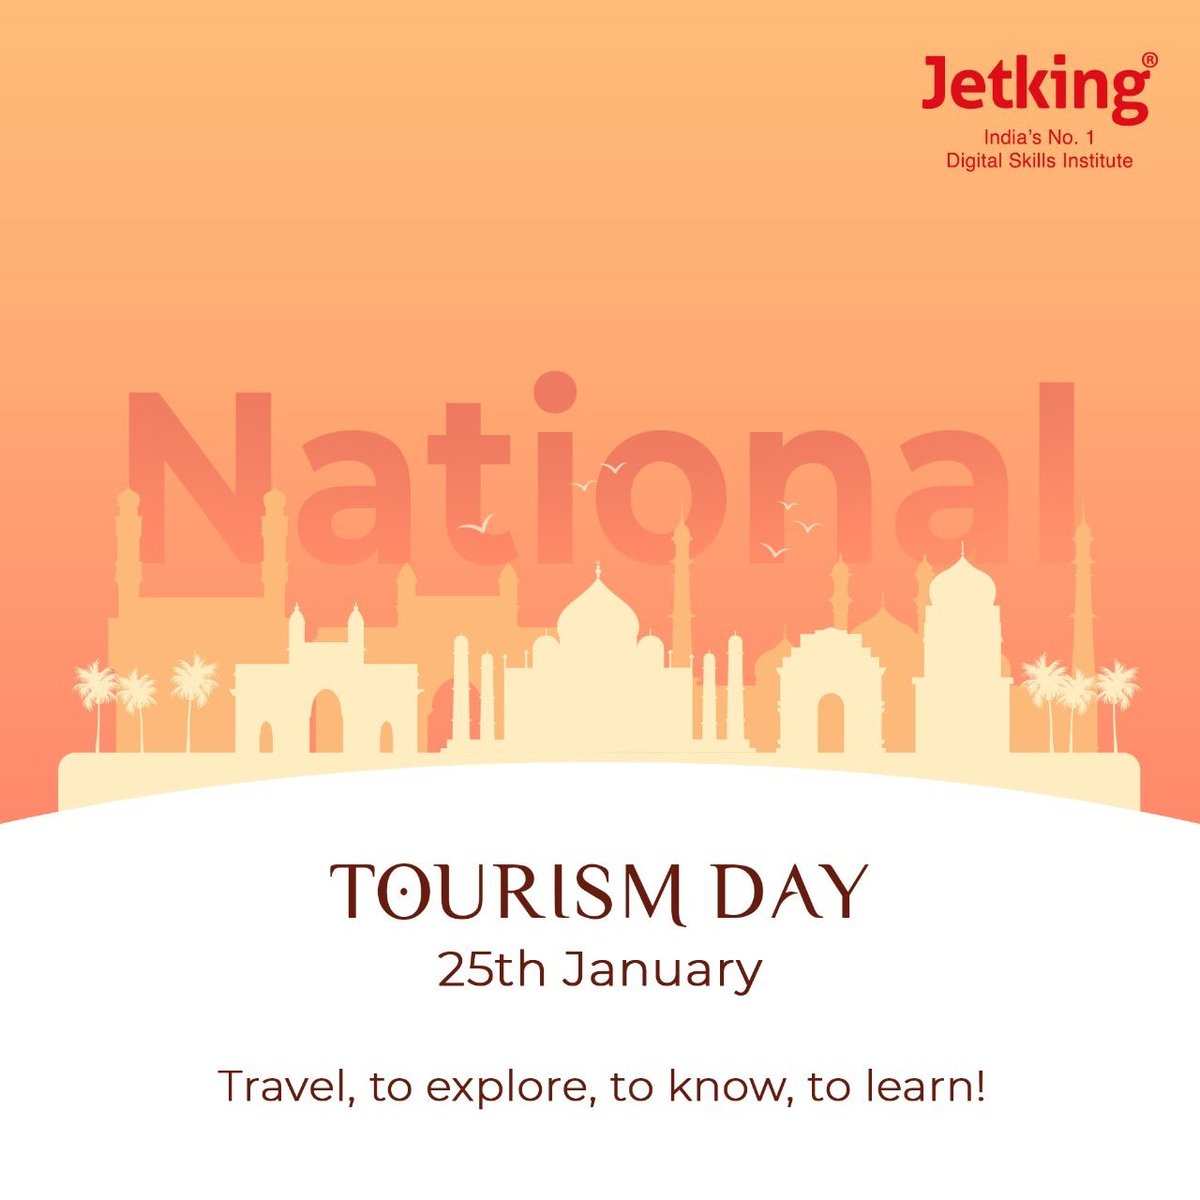 On National Tourism Day, let's explore India's glorious history, vibrant culture, magnificent scenic beauty, monuments, palaces, temples, and mountains which attract tourists from across the globe.
.
.
.
.
#NationalTourismDay #TourismDay #India #IncredibleIndia #JetkingChandigarh